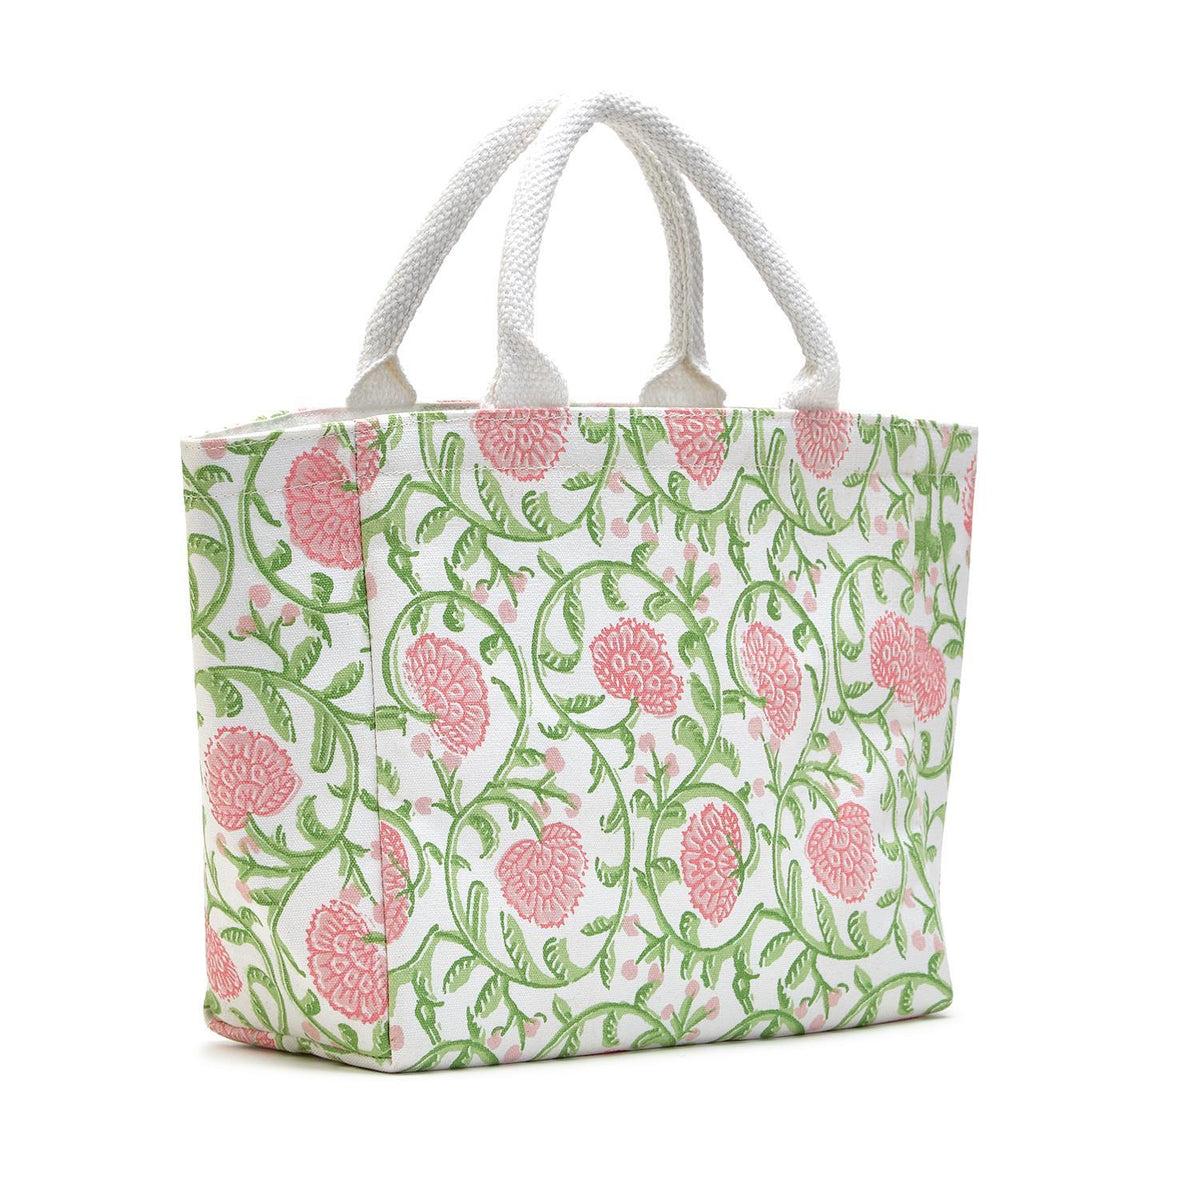 Floral Block Print Thermal Lunch Tote Bag in Assorted 3 Patterns - Cotton Canvas - The Preppy Bunny